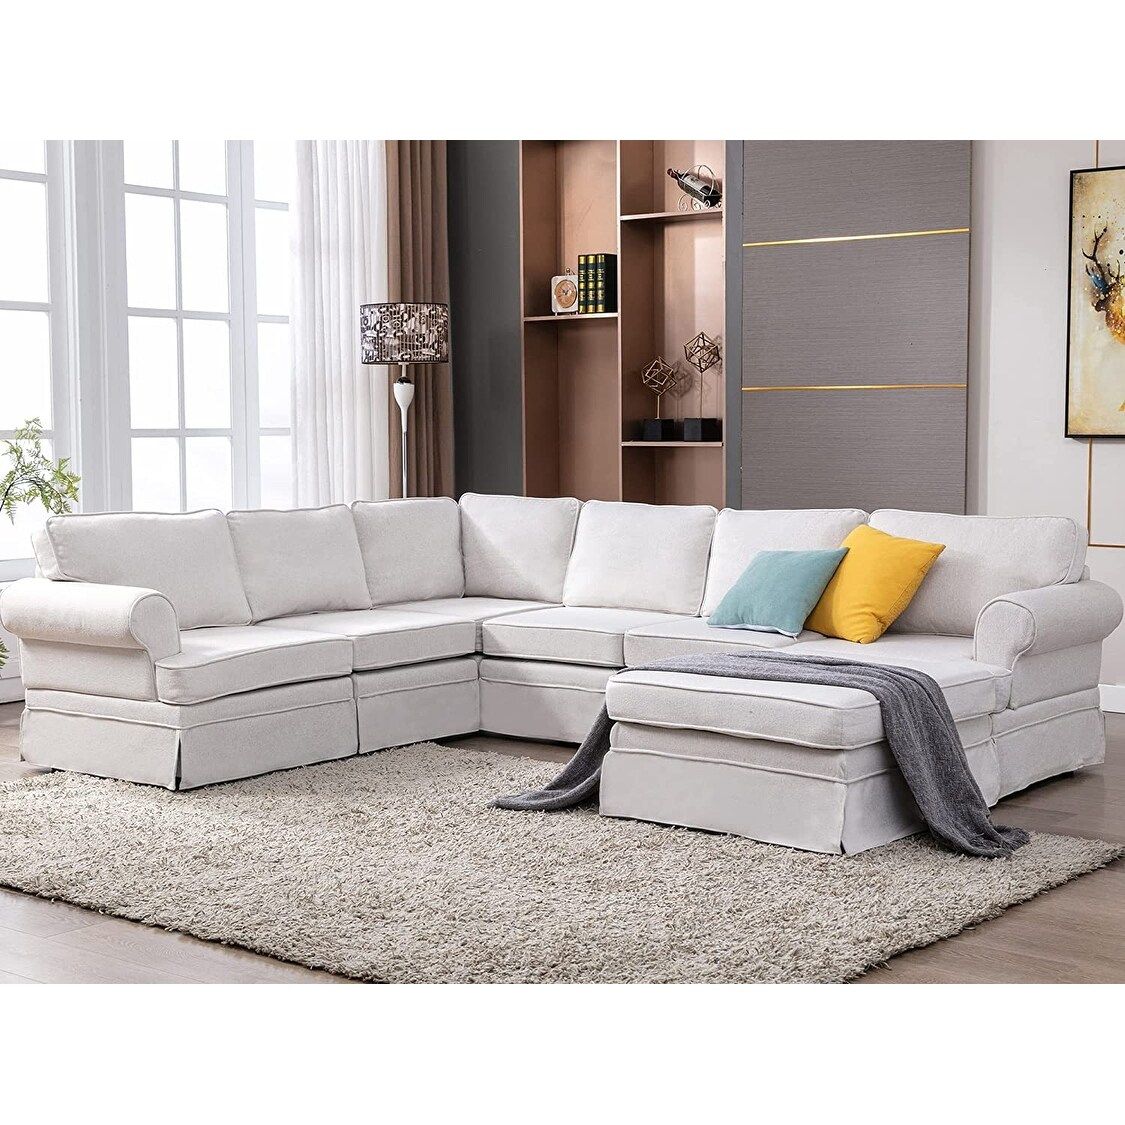 U Shaped Upholstered Modular Sectional Sofa With Removable Ottoman, Light  Beige – – 37864833 In Upholstered Modular Couches With Storage (Photo 14 of 15)